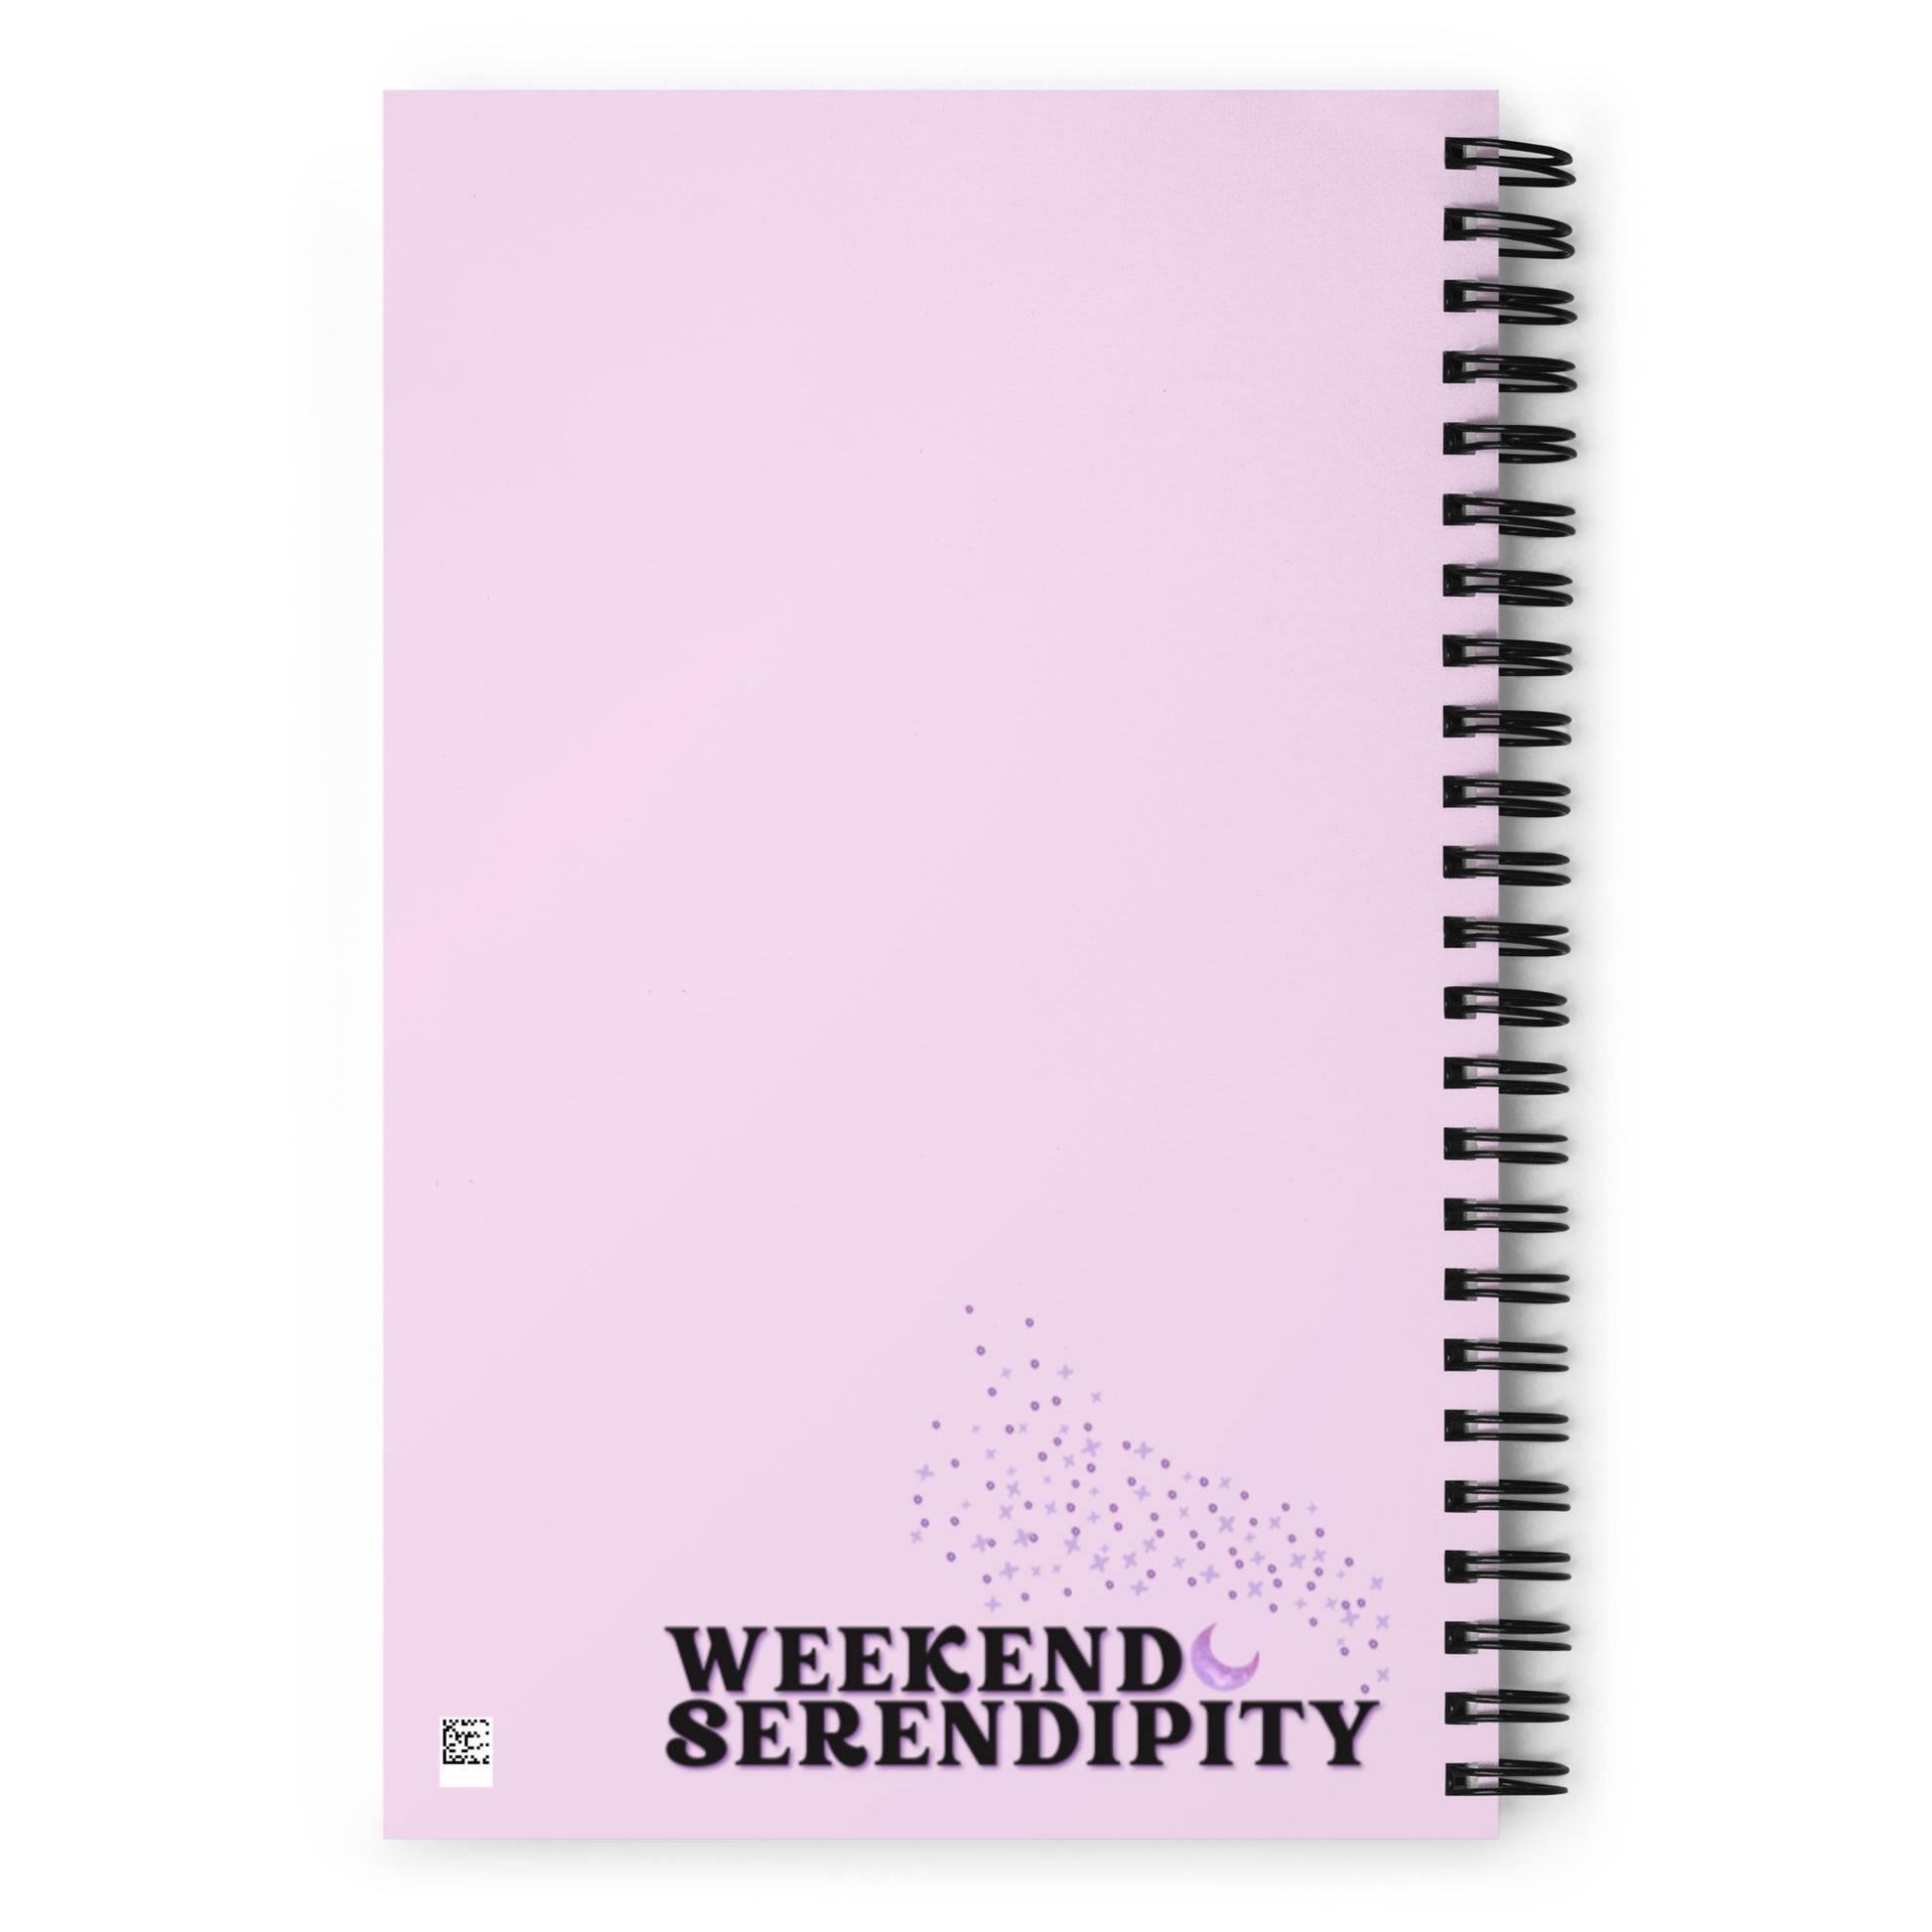 backside of notebook with Weekend Serendipity logo